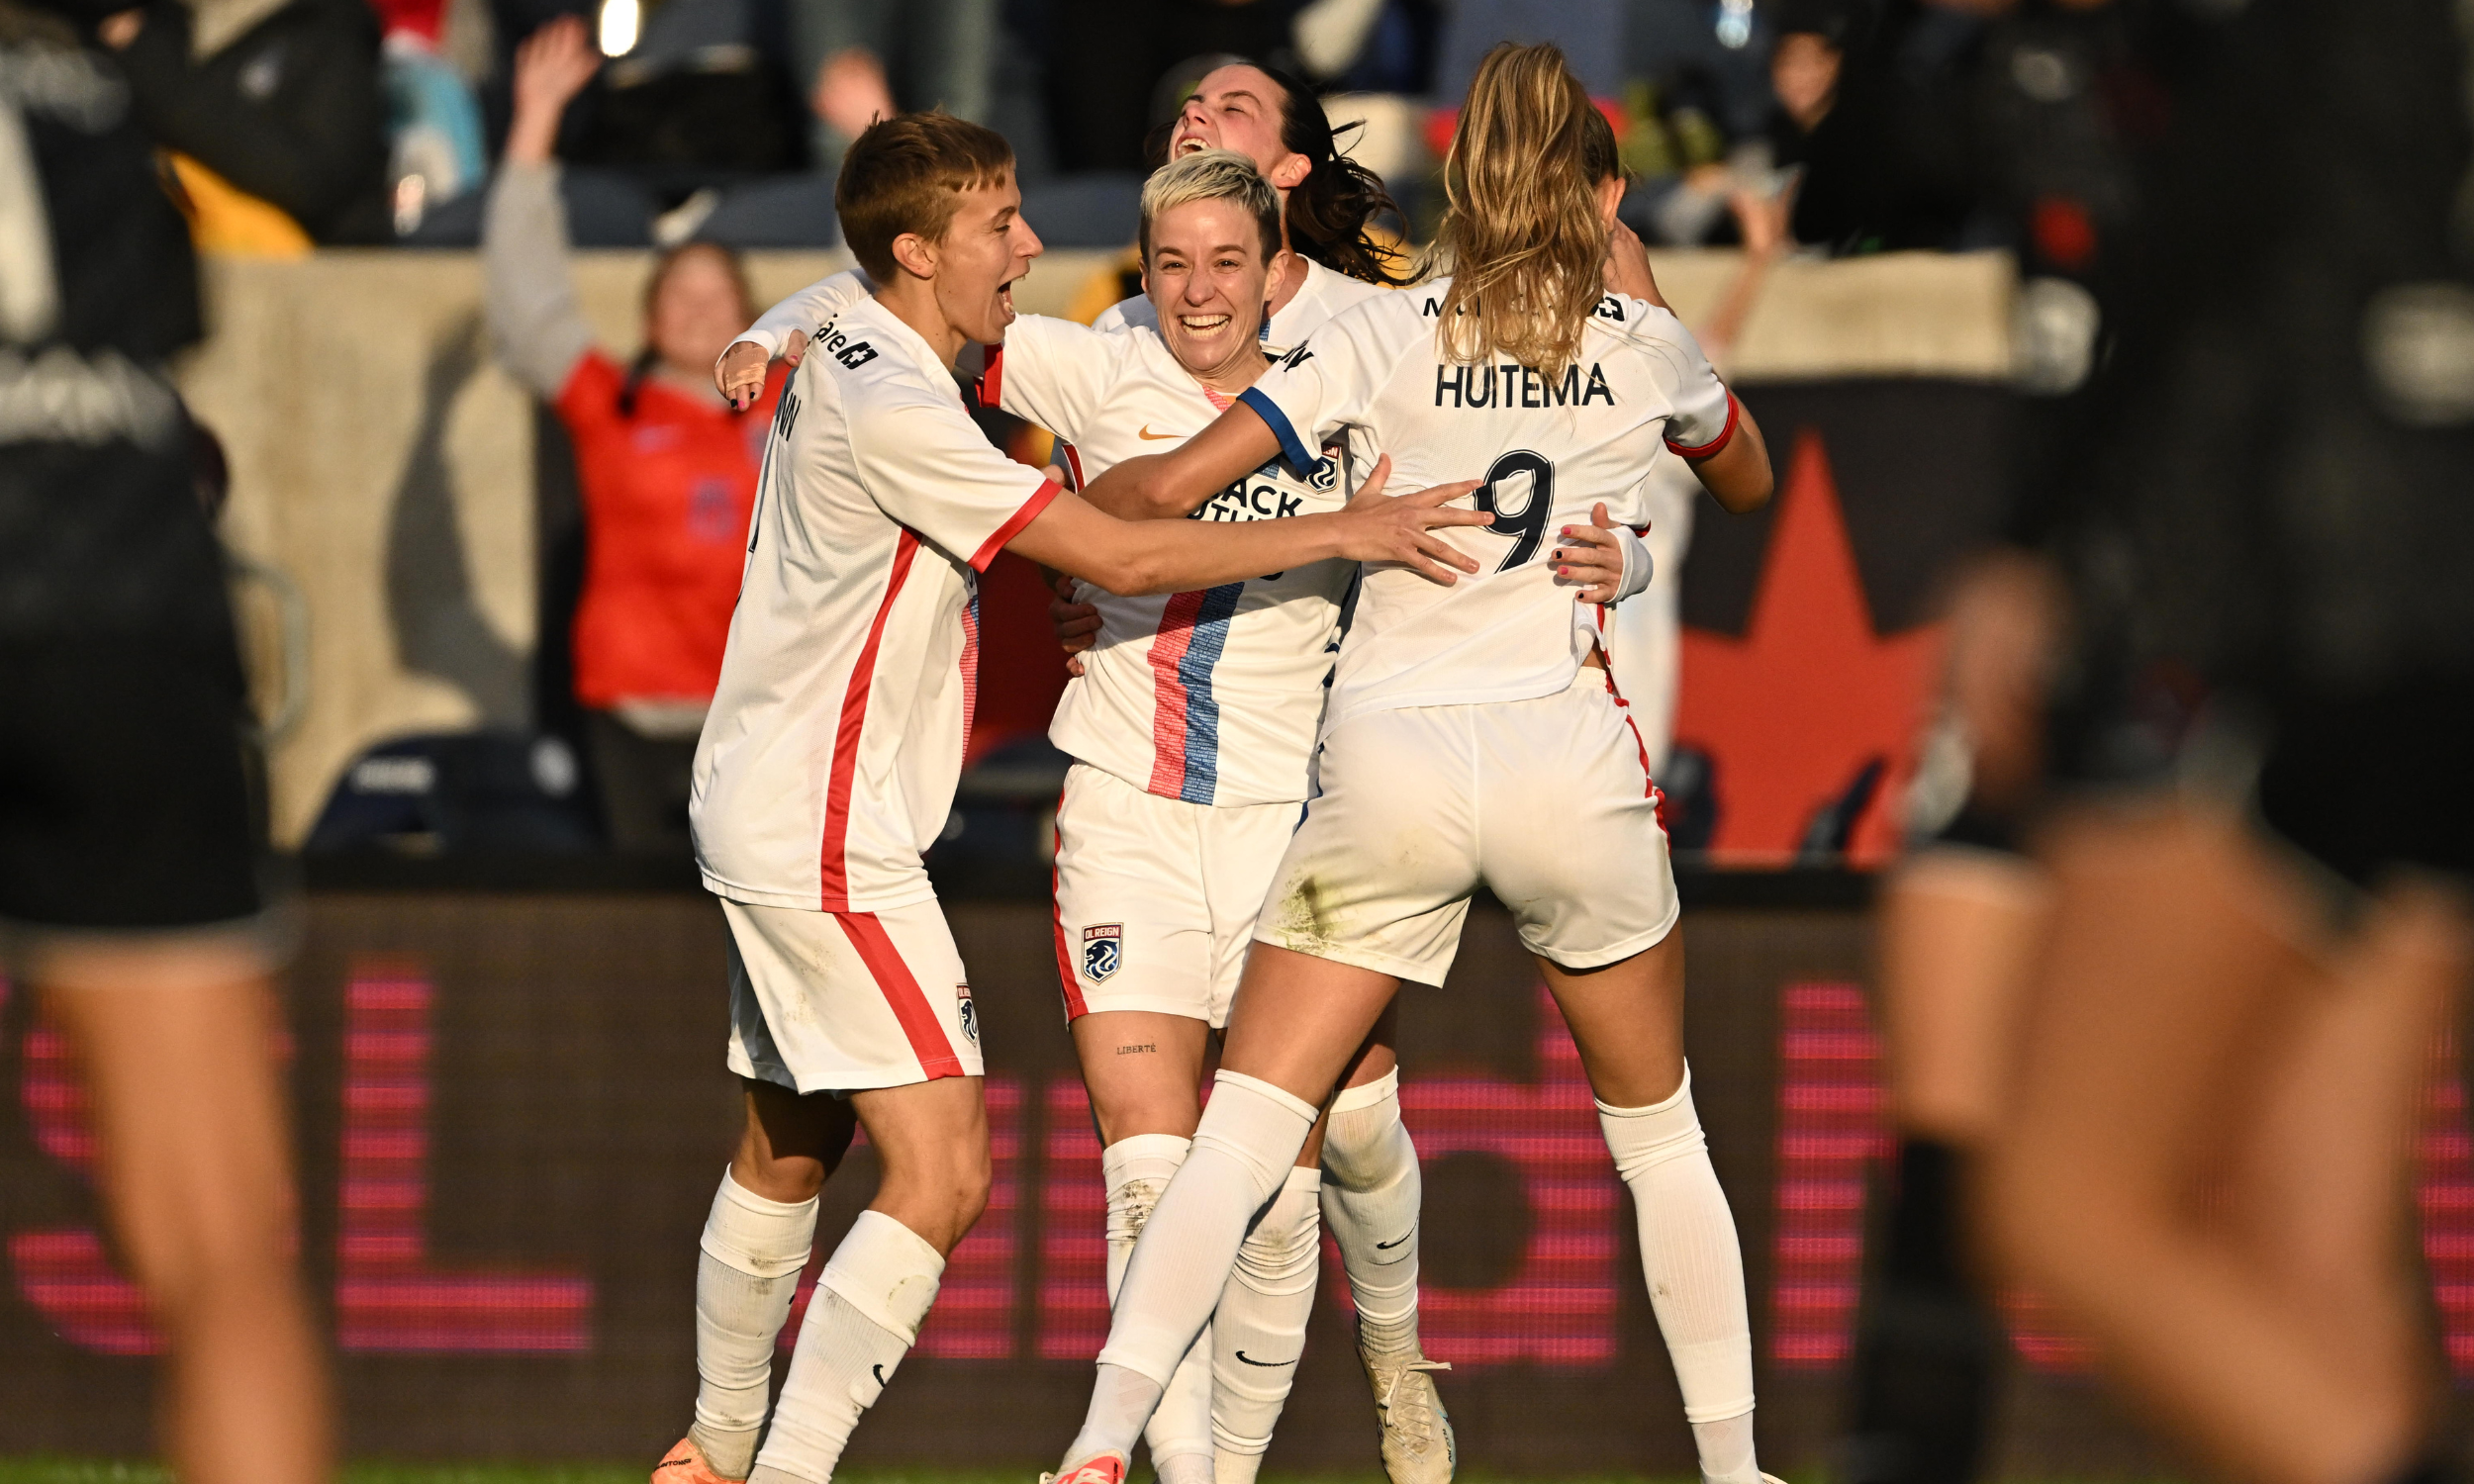 Match Recap: OL Reign Advances to Fifth Consecutive NWSL Semifinal